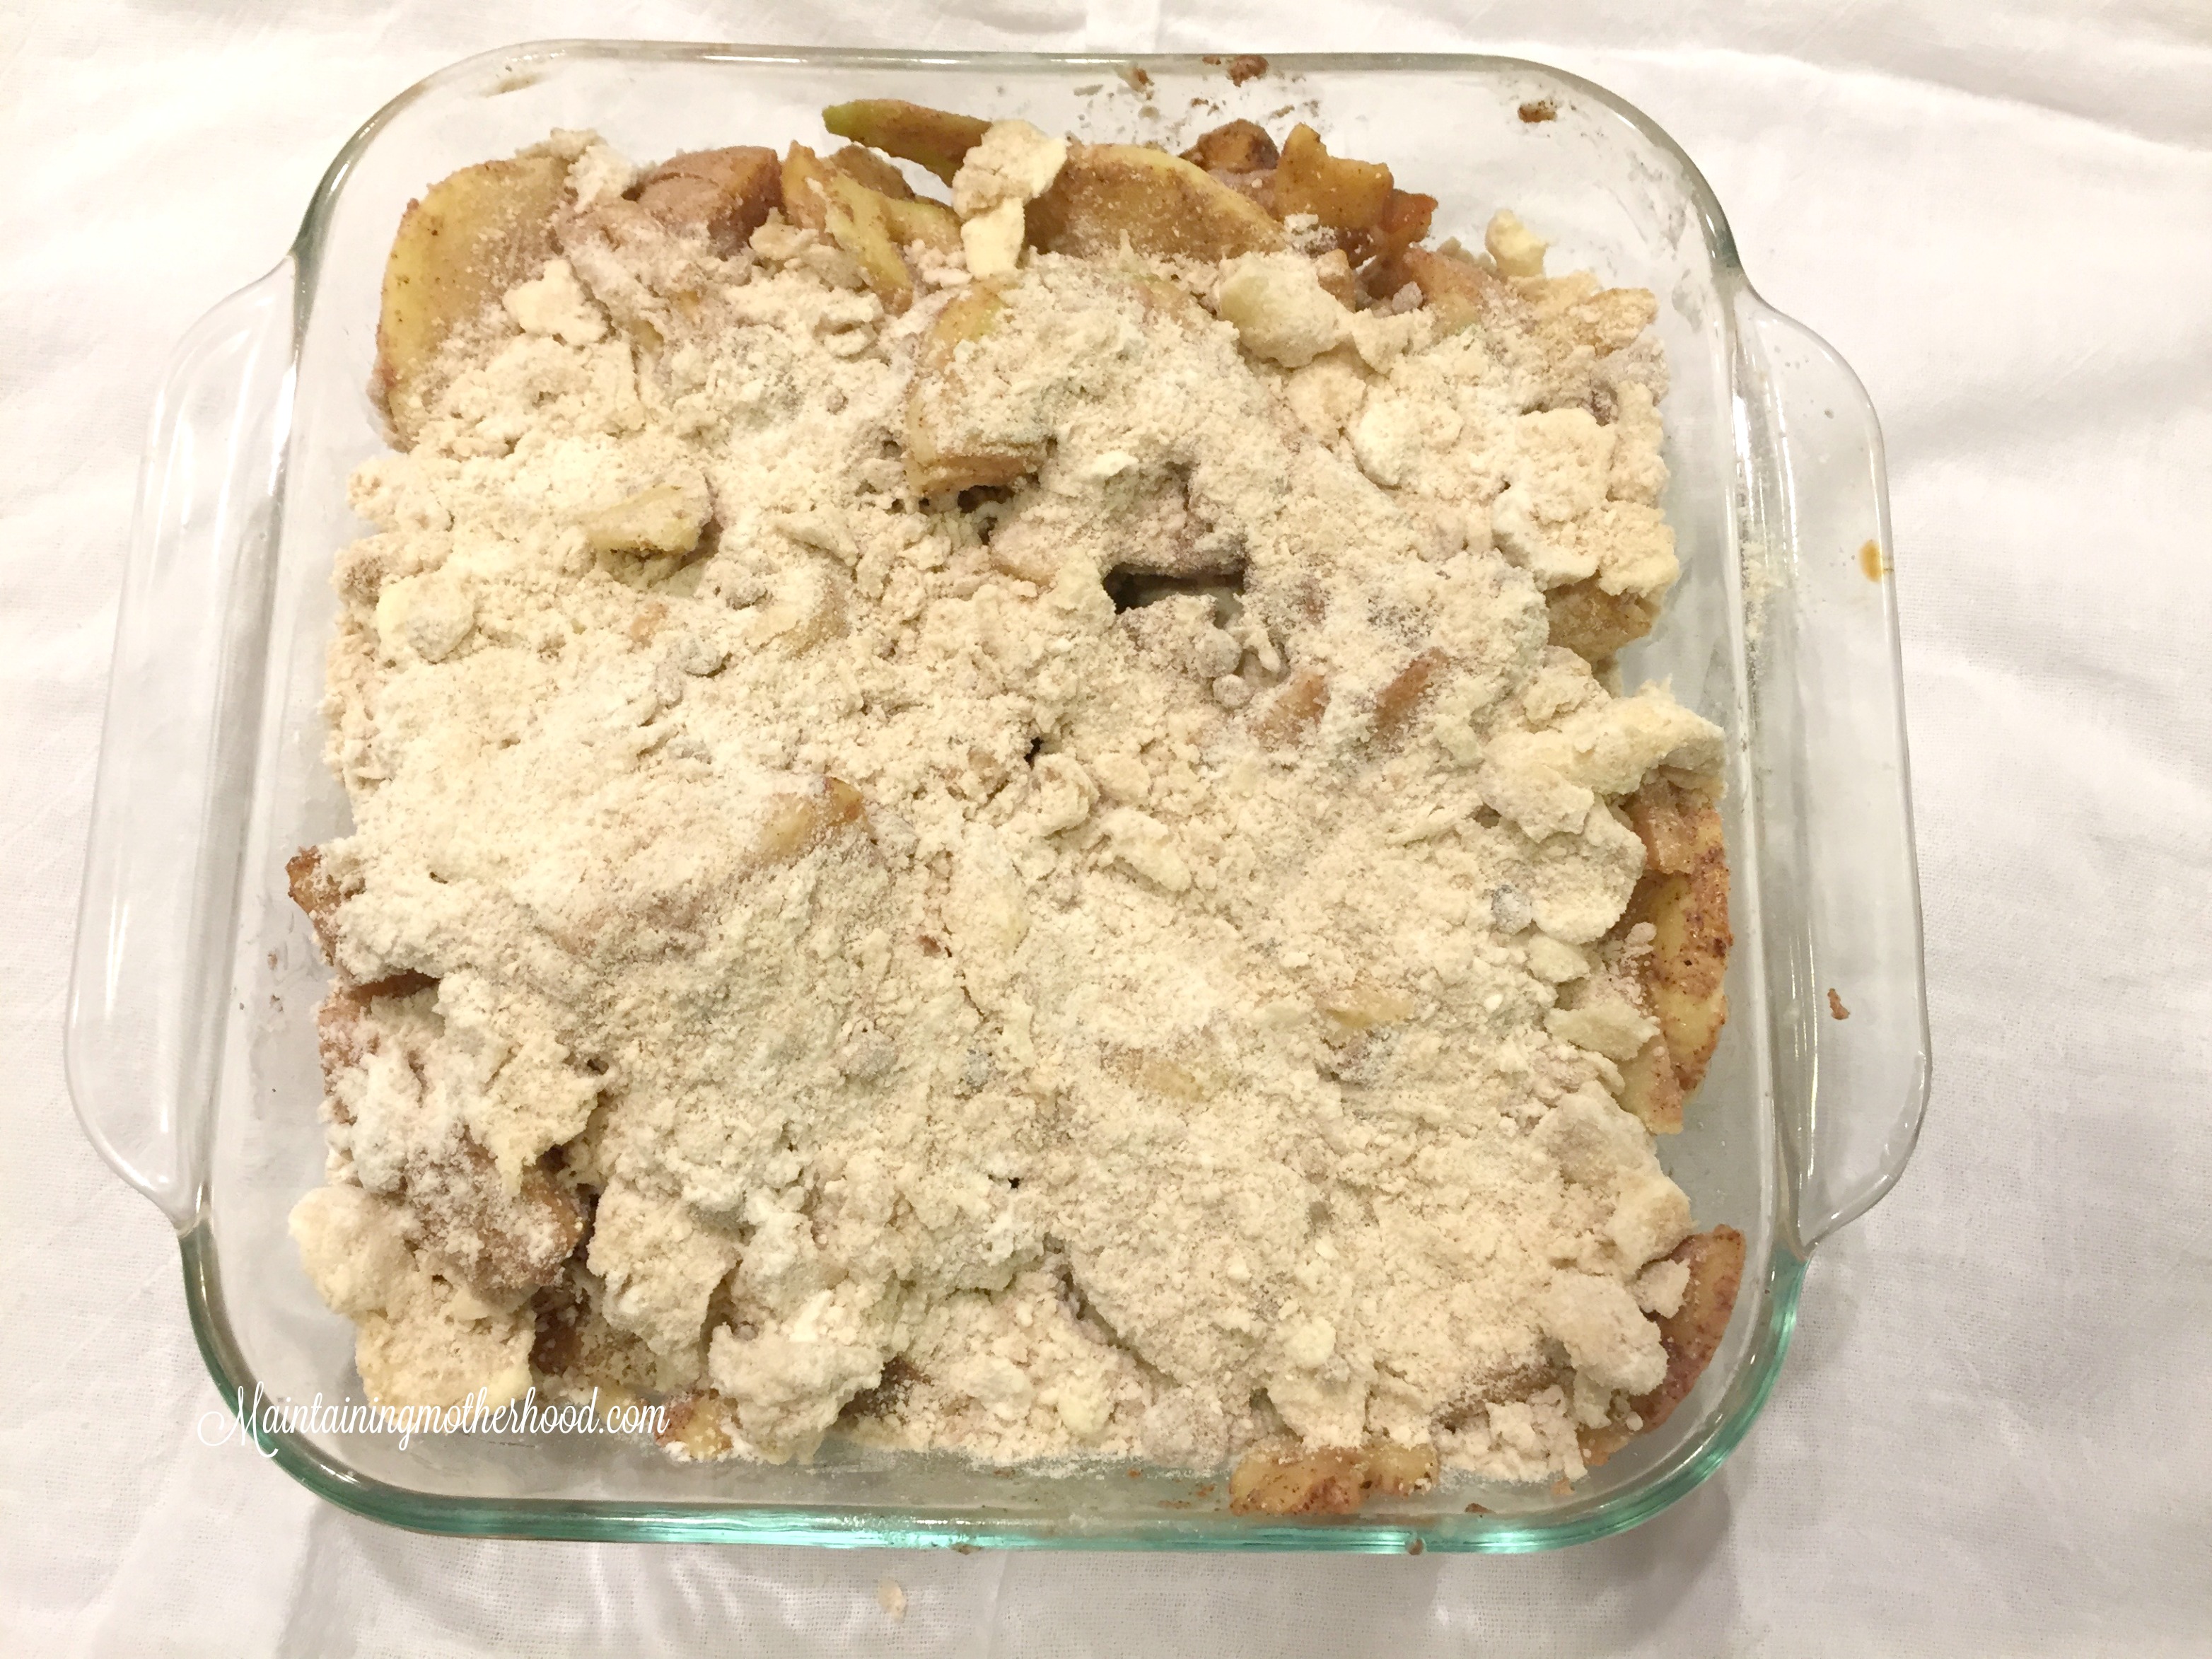 Looking for a delicious alternative to pie? This apple dessert is the perfect marriage of apple pie with a crispy, crumbly, and strudel topping.